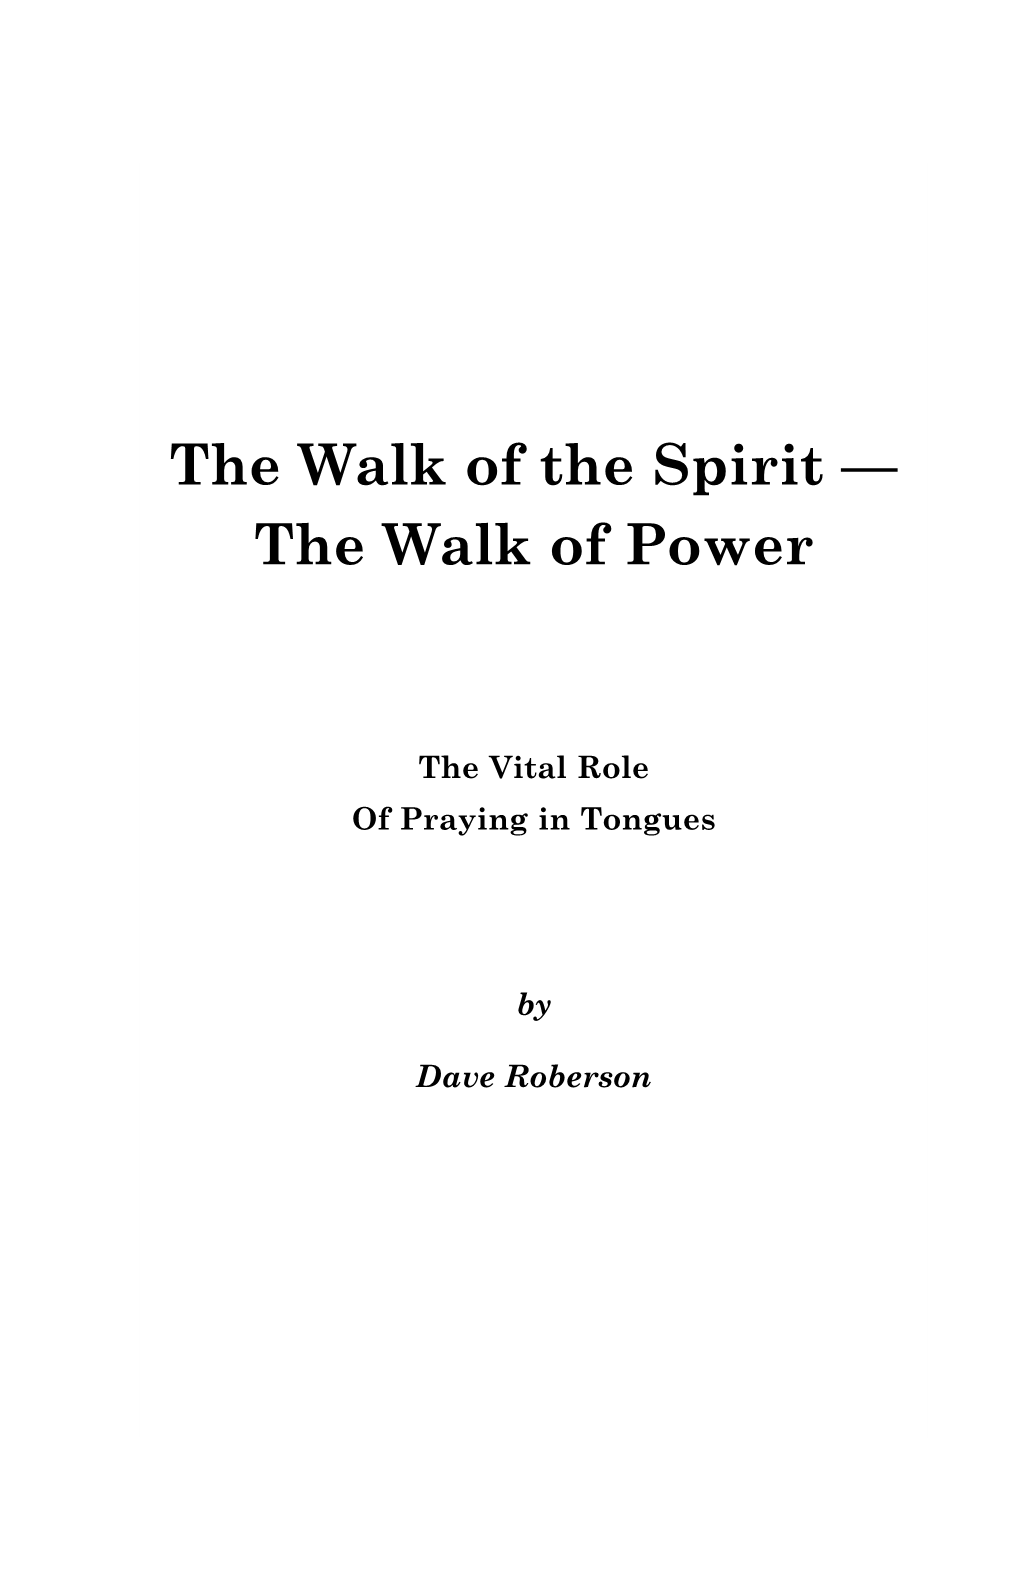 The Walk of the Spirit--The Walk of Power